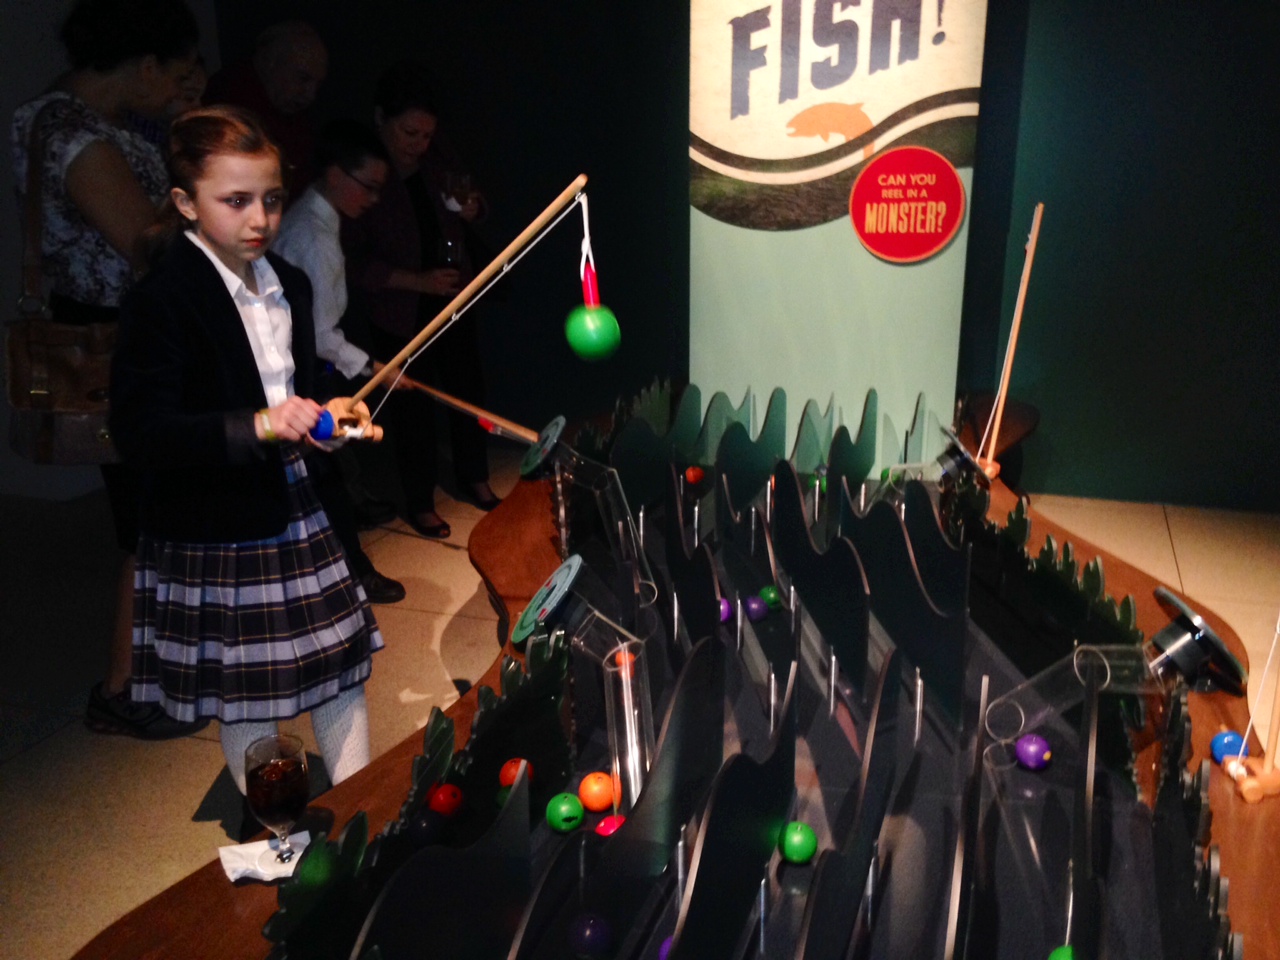 A child fishes at one of the many interactive stops within the exhibit. (WTOP/Megan Cloherty)